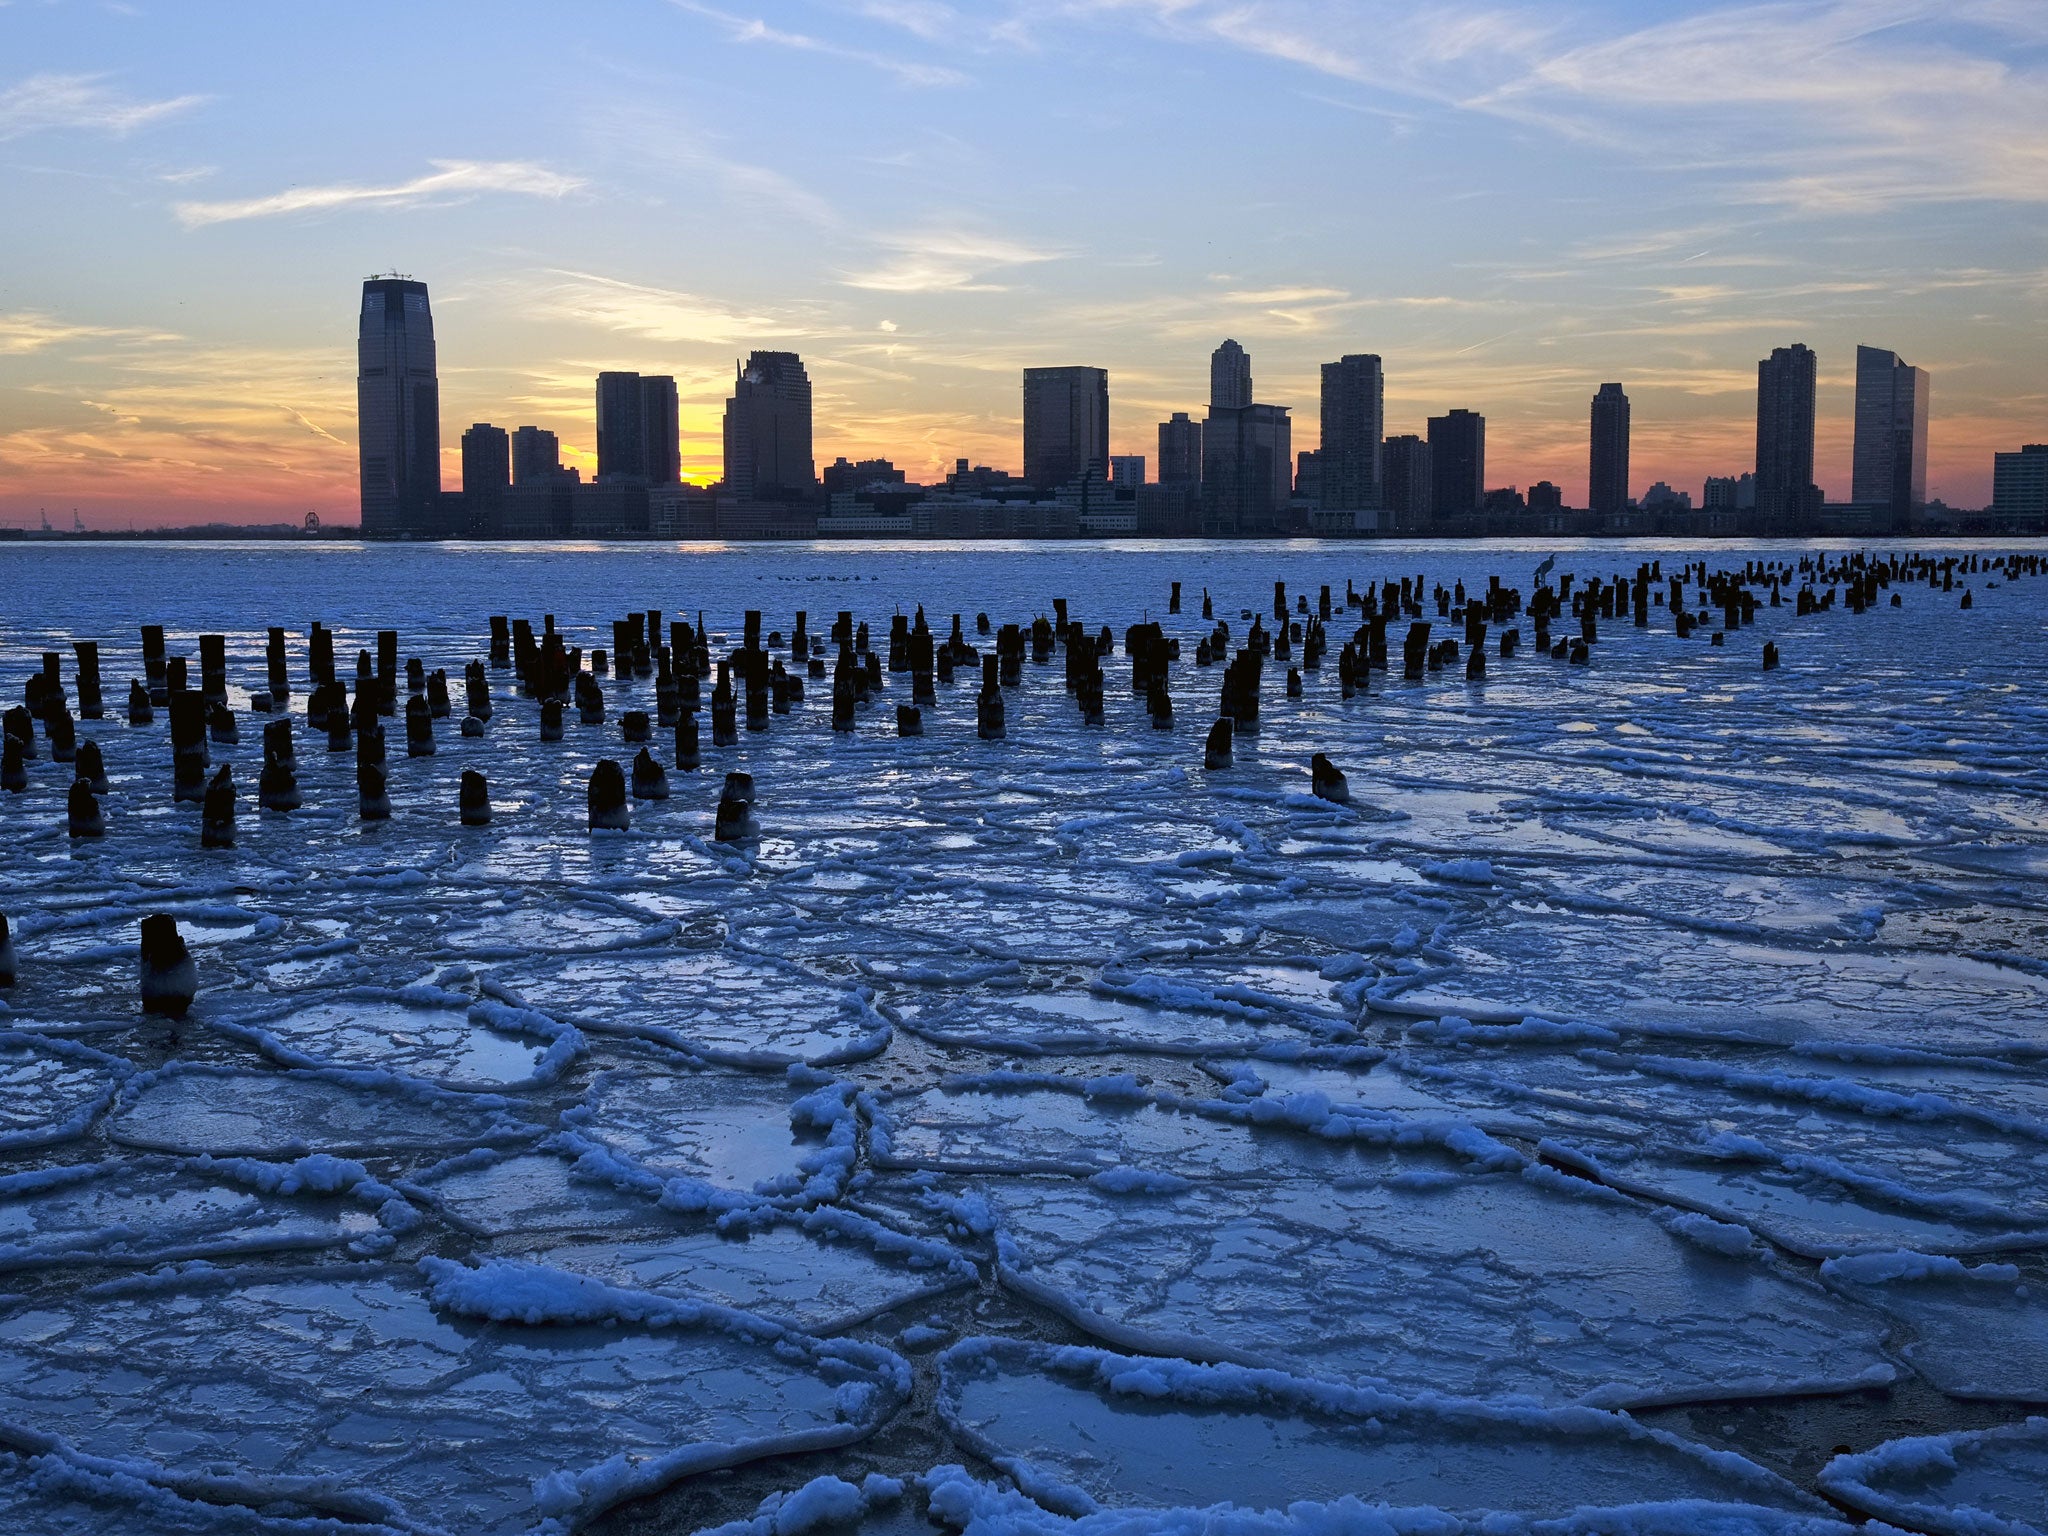 Ice floes fill the Hudson River as the New Jersey waterfront is seen during sunset on 9 January, in New York City.